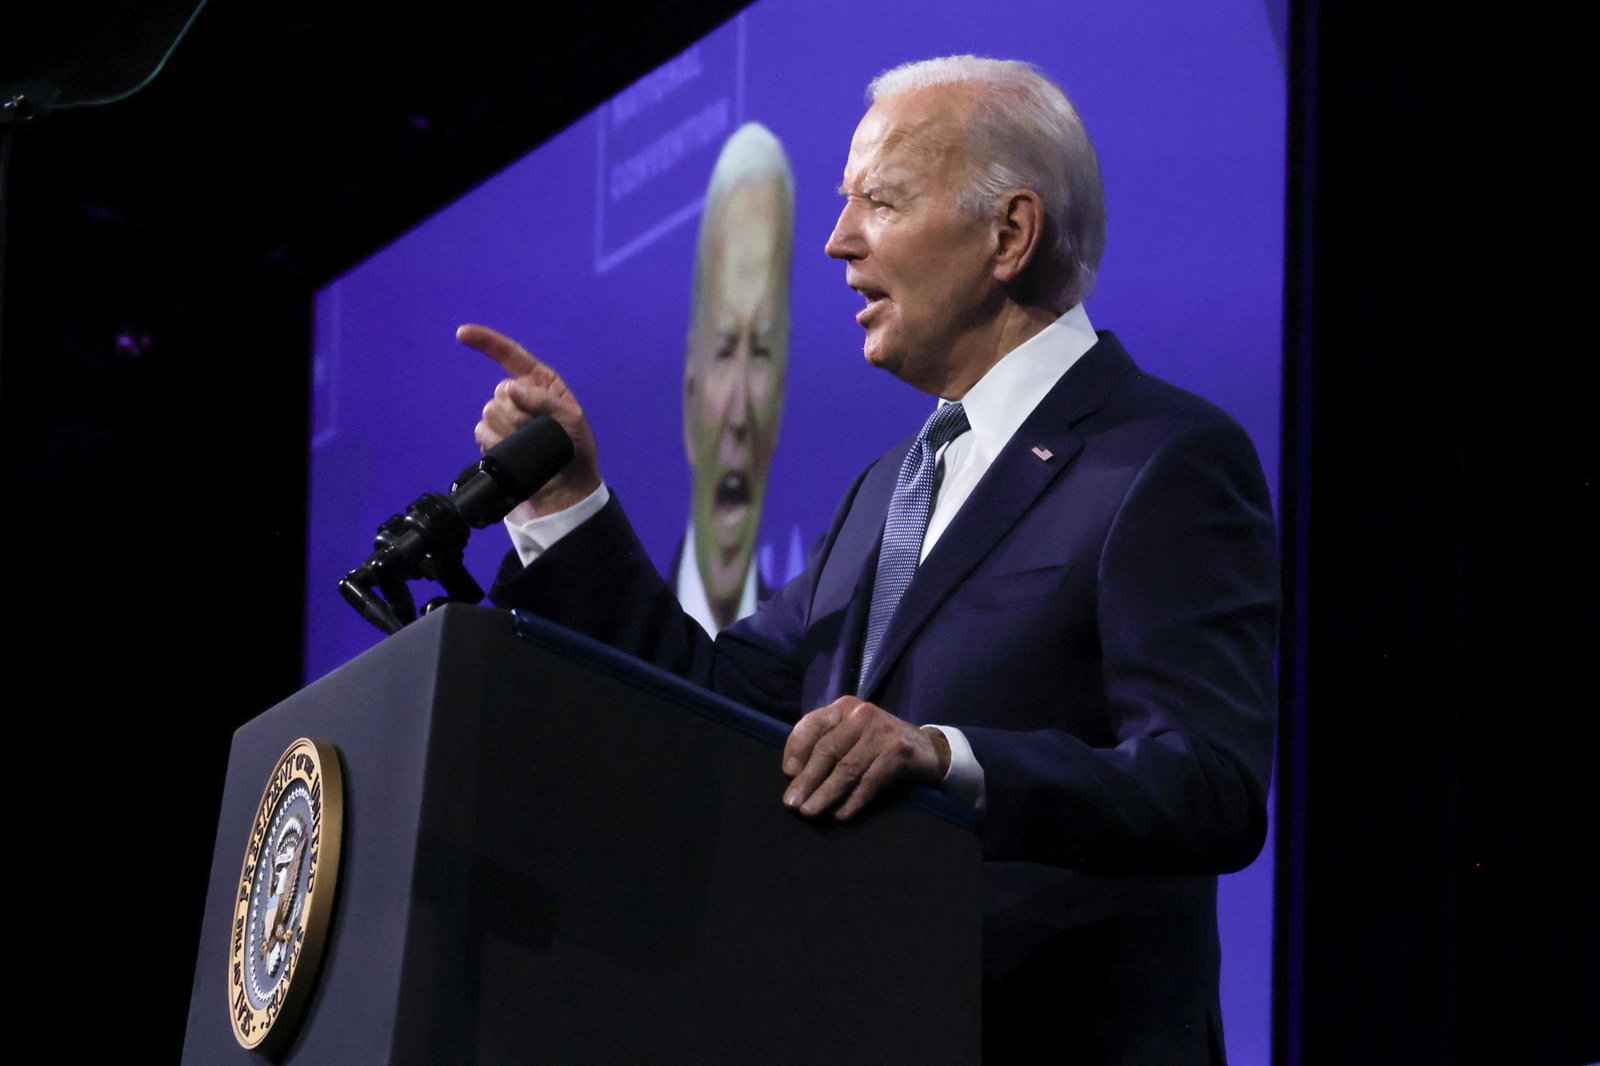 Biden points with his right hand as he speaks at a podium